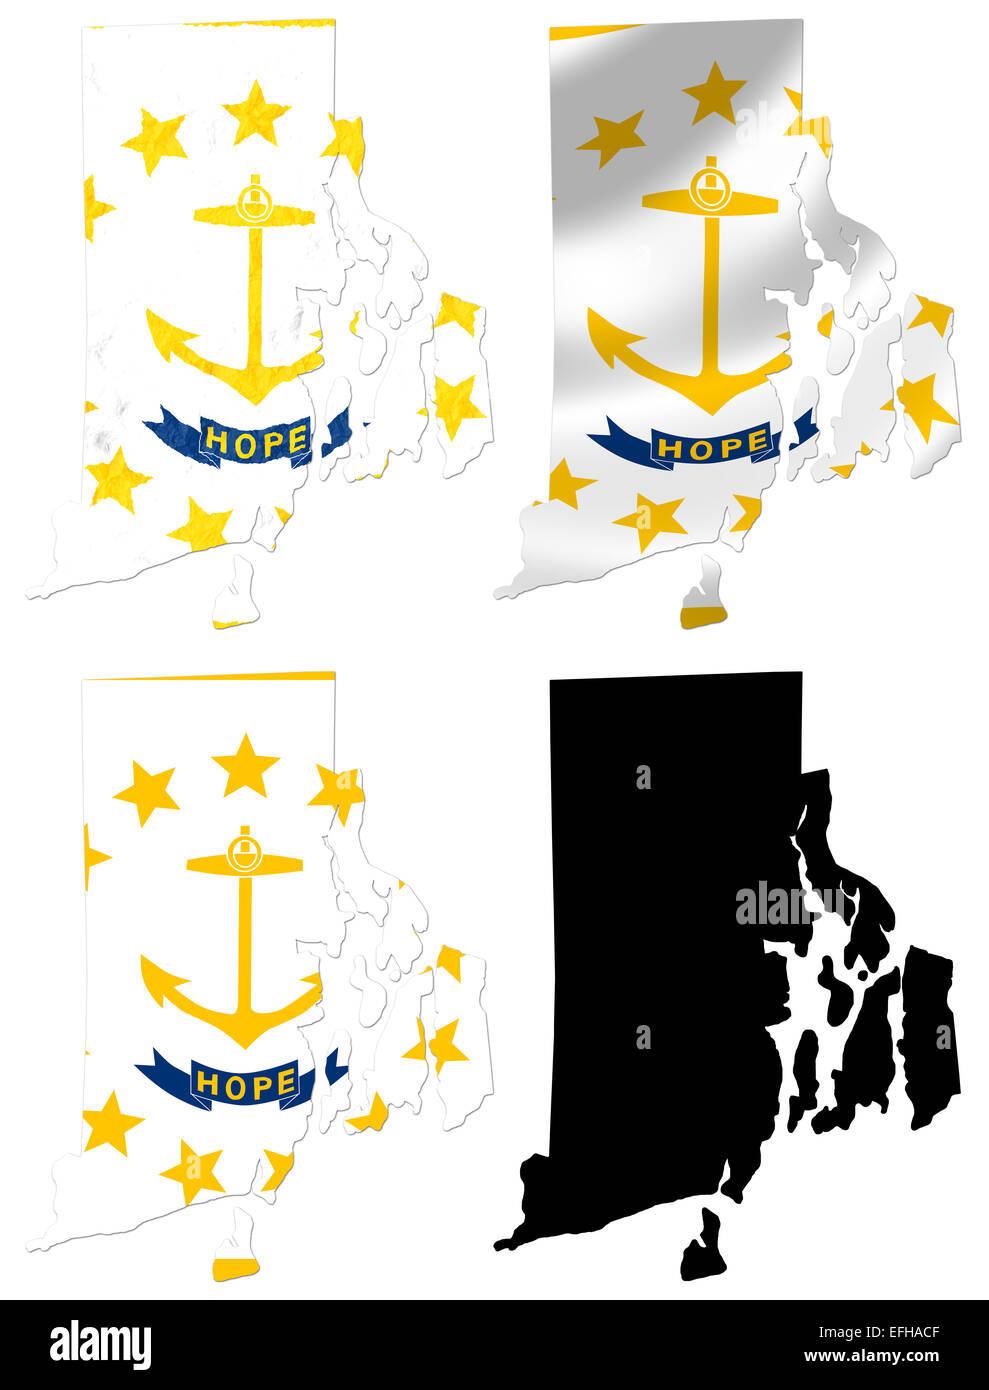 US Rhode Island state flag over map collage Stock Photo